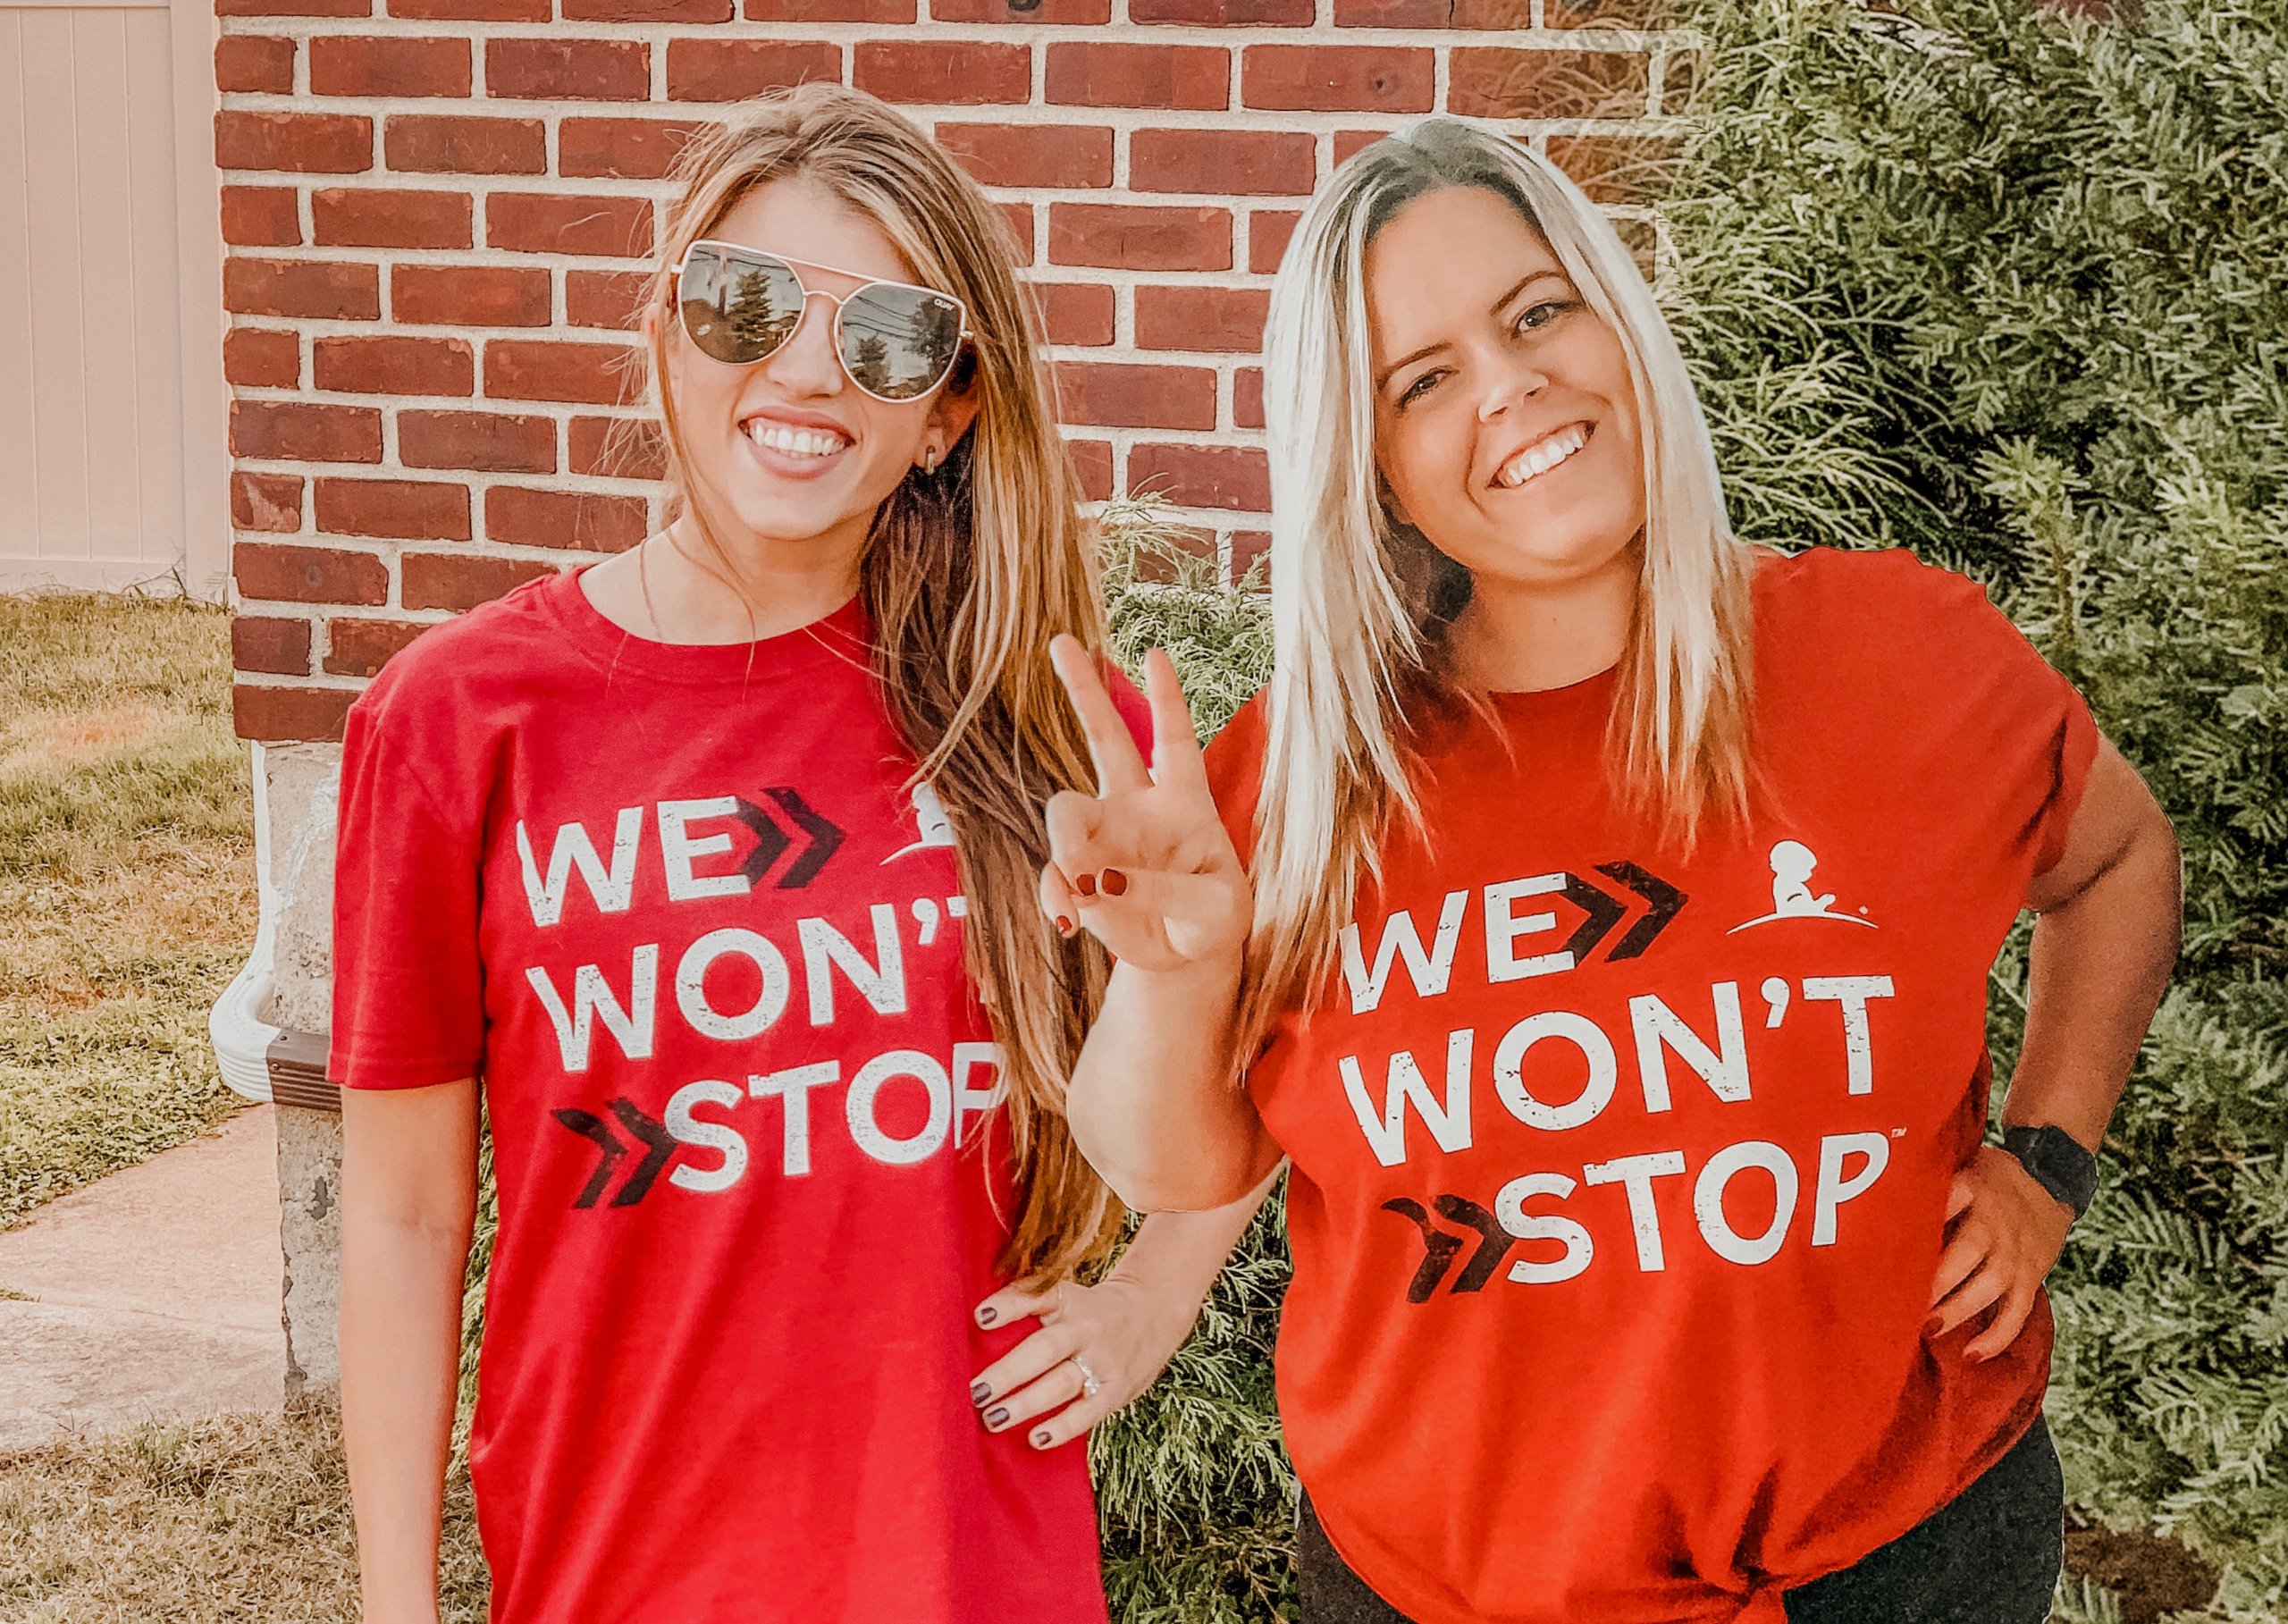 NYCountry Swag's Christina Bosch & Stephanie Wagner rocking St. Jude's "We Won't Stop" Tees